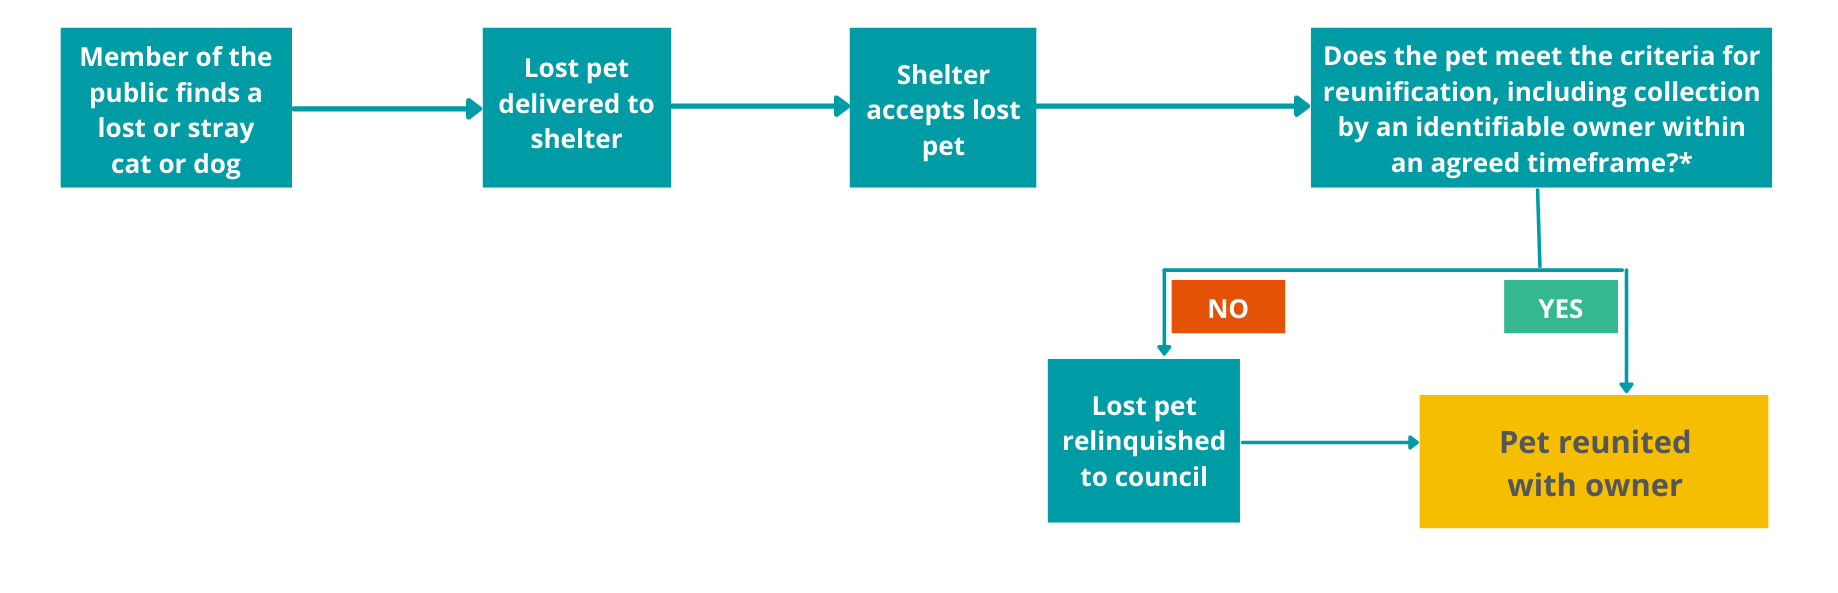 Process for reuniting pets through shelters. Further information below image.